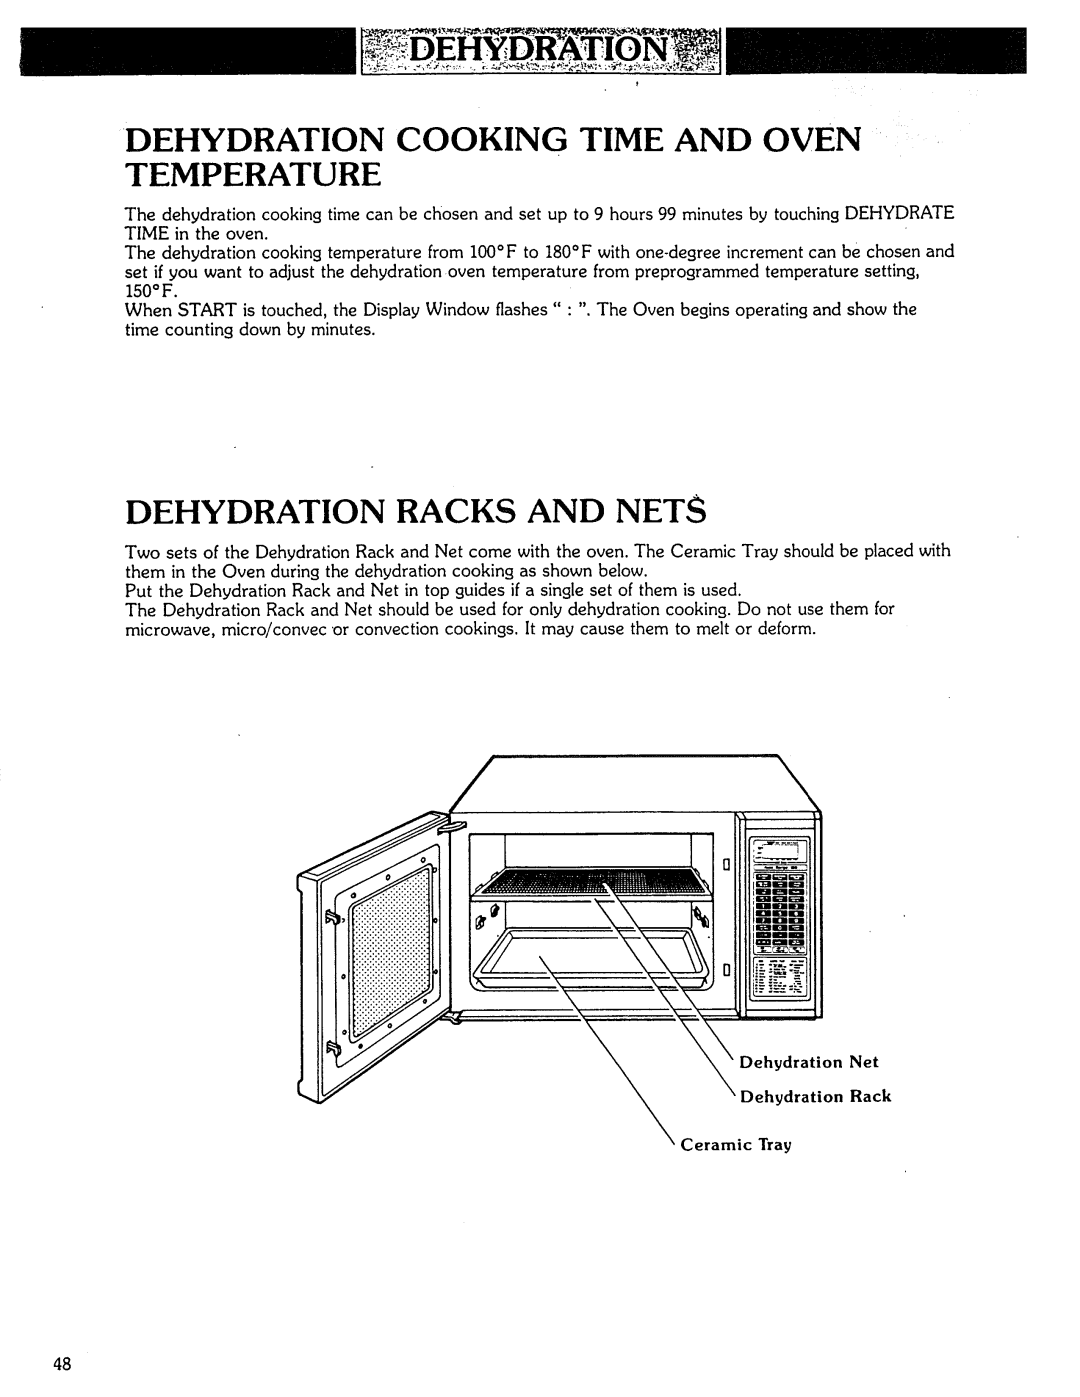 Kenmore Microwave Oven manual Dehydration Cooking Time And Oven, Temperature, Dehydration Racks And Nets 